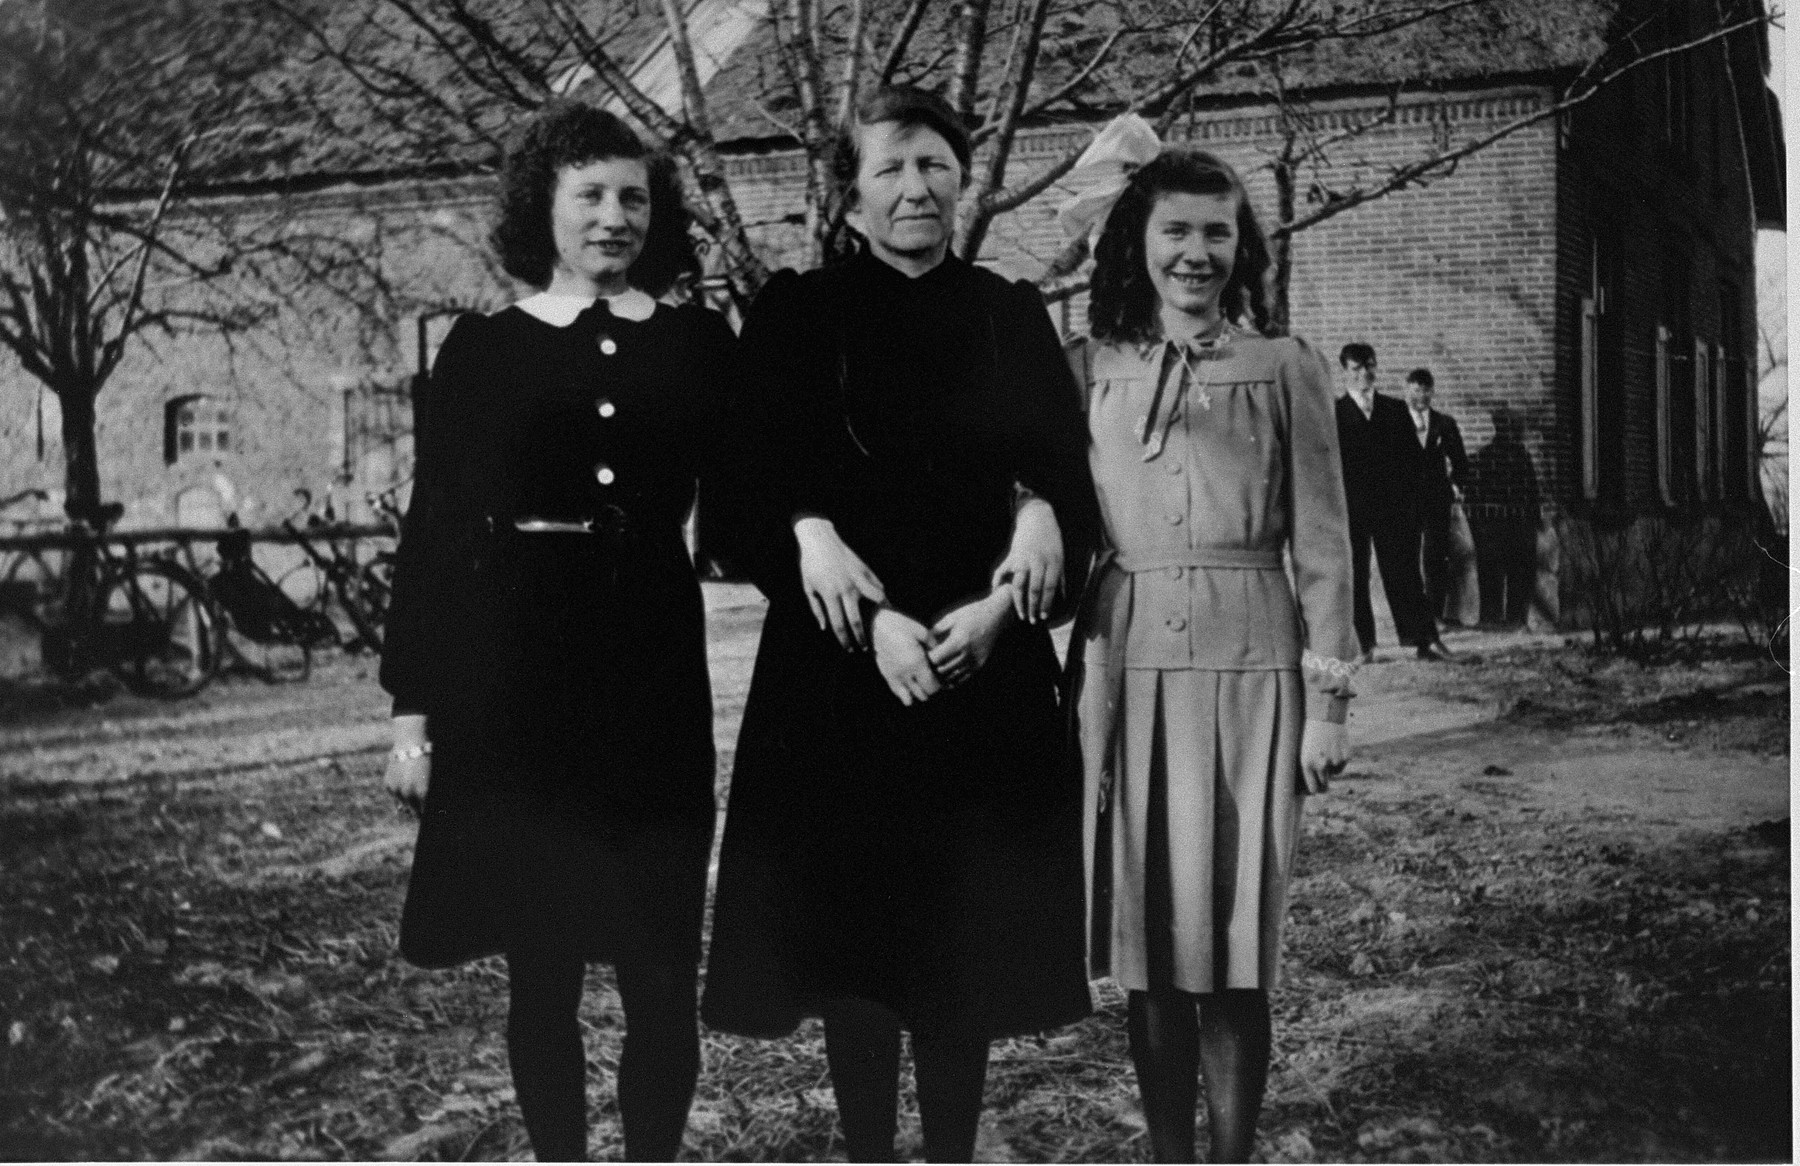 Marion Kaufmann visits the Beelen family farm for the last time before her immigration to the United States.  

The Beelens hid Marion during the war. From left to right: Grada Beelen, Wilhelmina "Moeke" Beelen, and Rie Beelen.